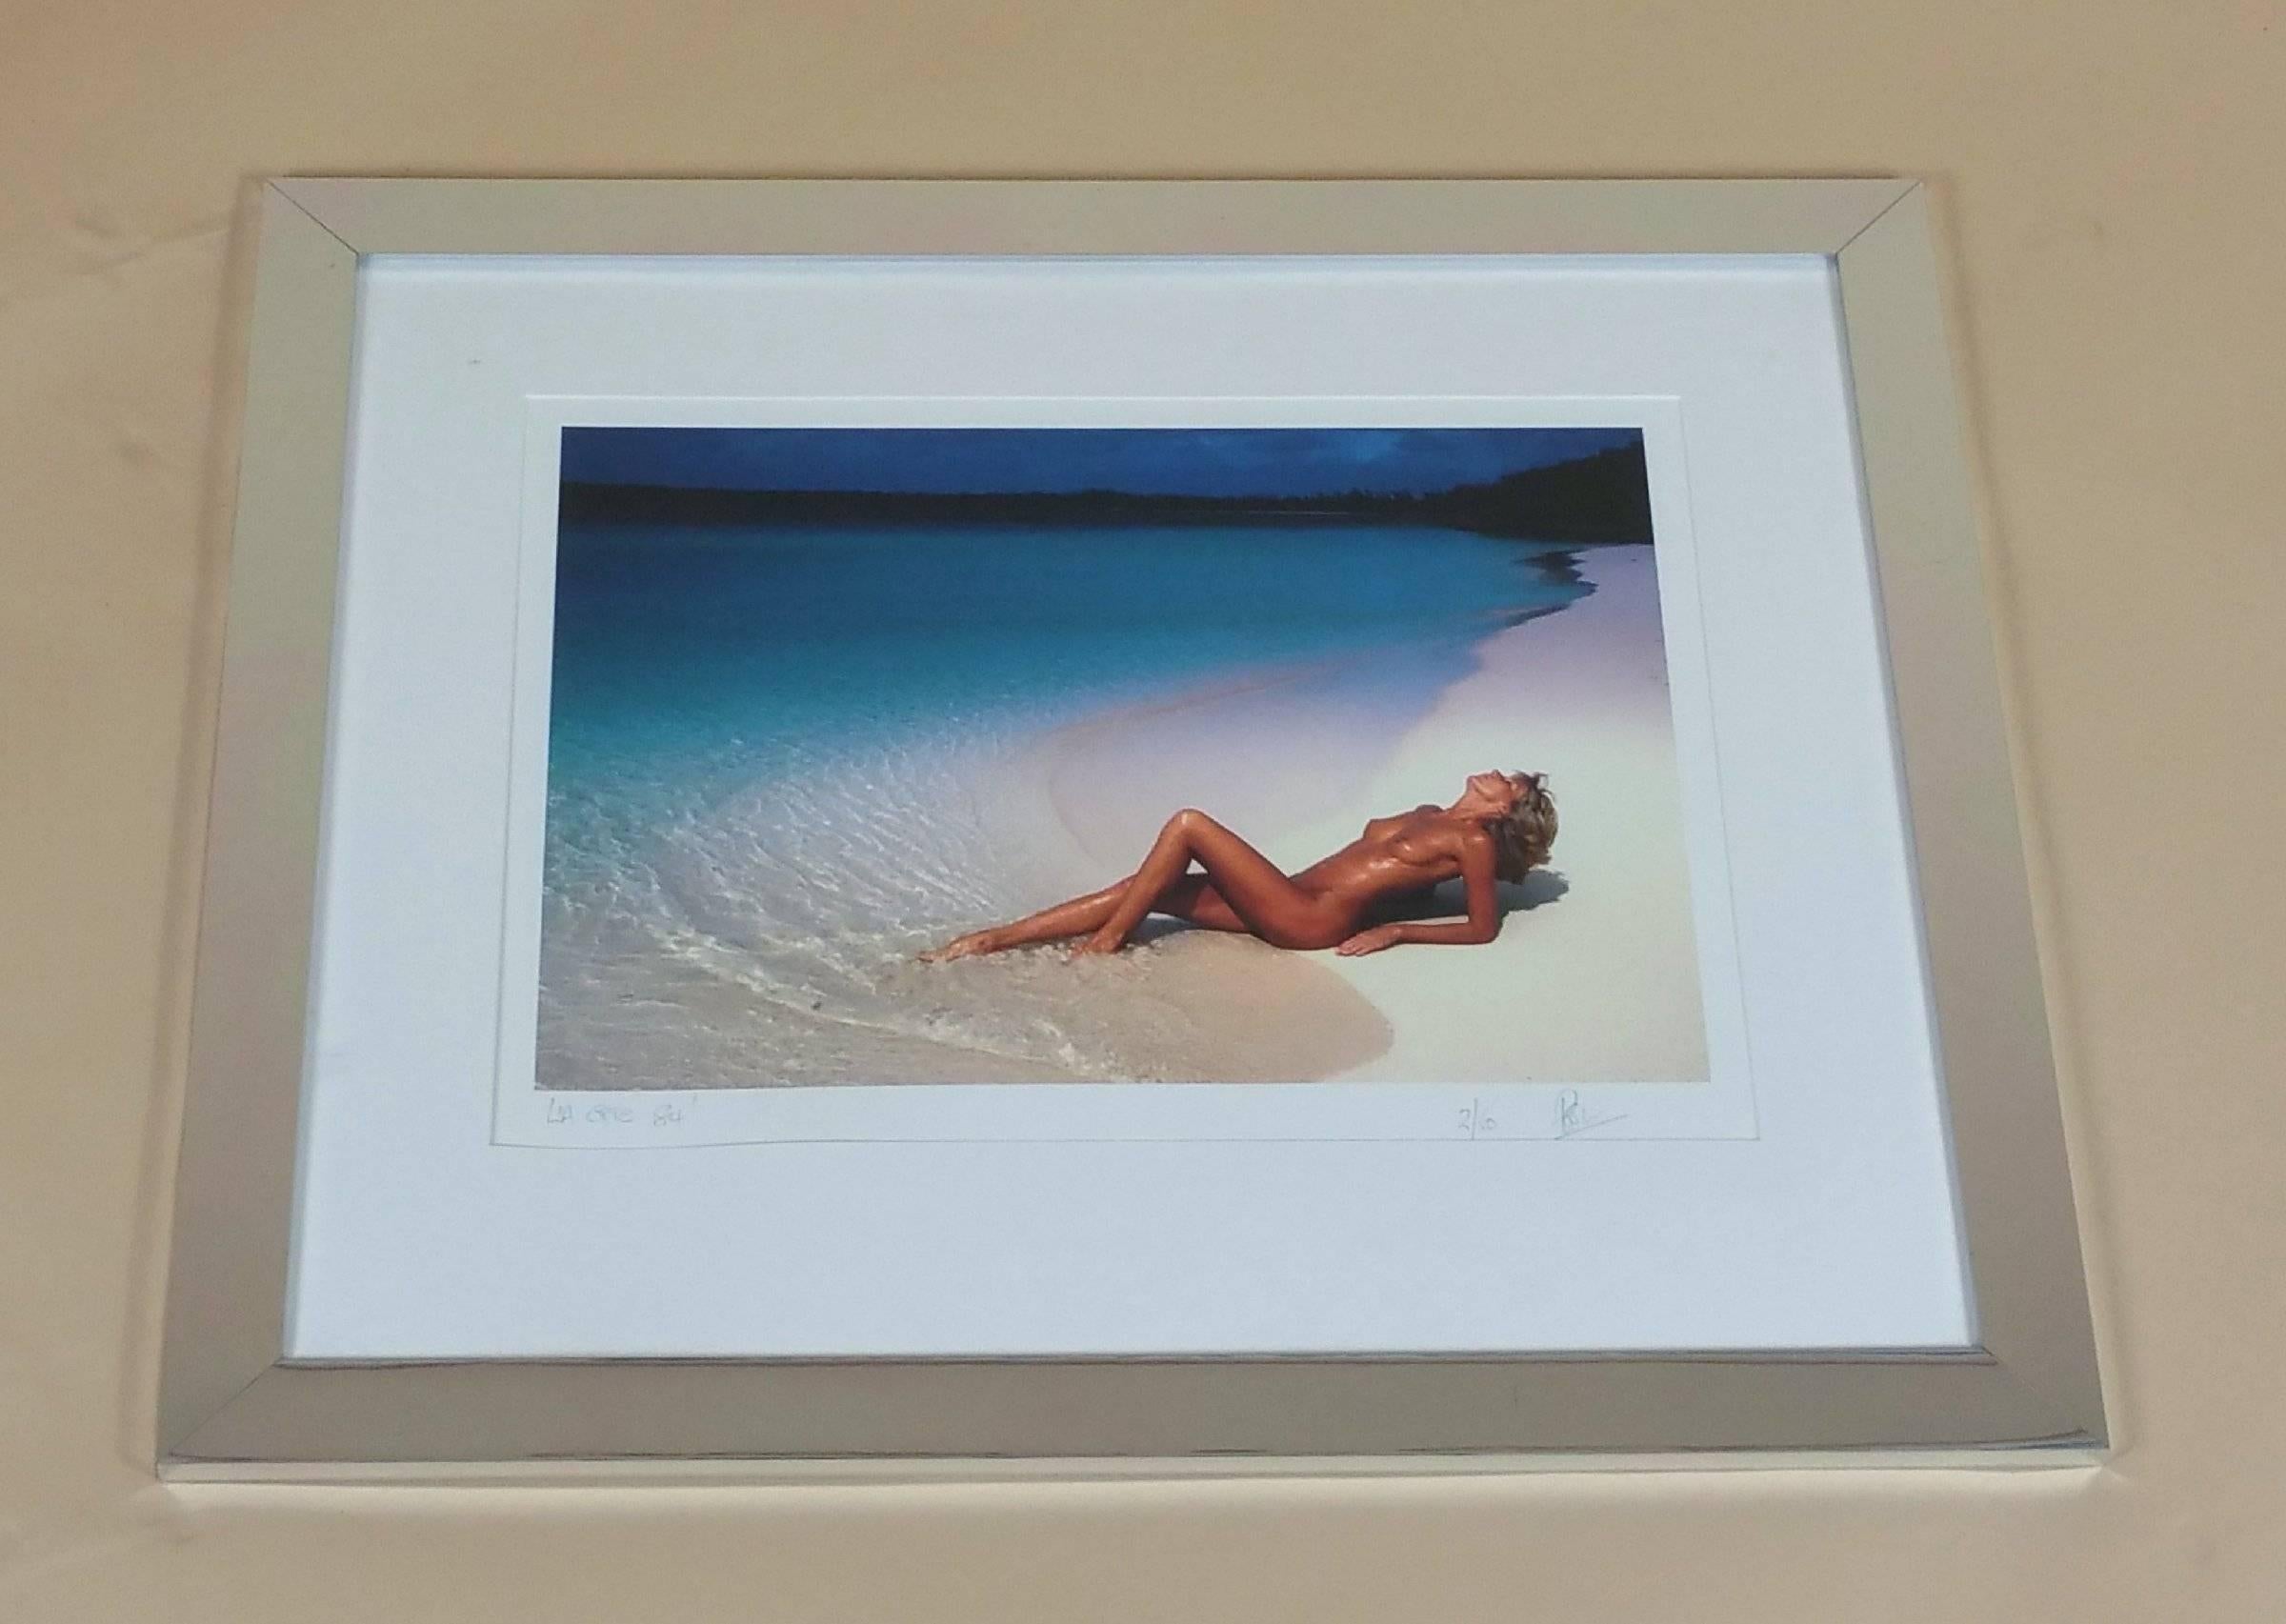 One of two original photographs signed and dated by the artist, which is signed ‘Poole’, dated 1984. The color photograph depicts a nude woman reclining on the sand of a beach, possibly on the west coast of the United States. The picture measures 26